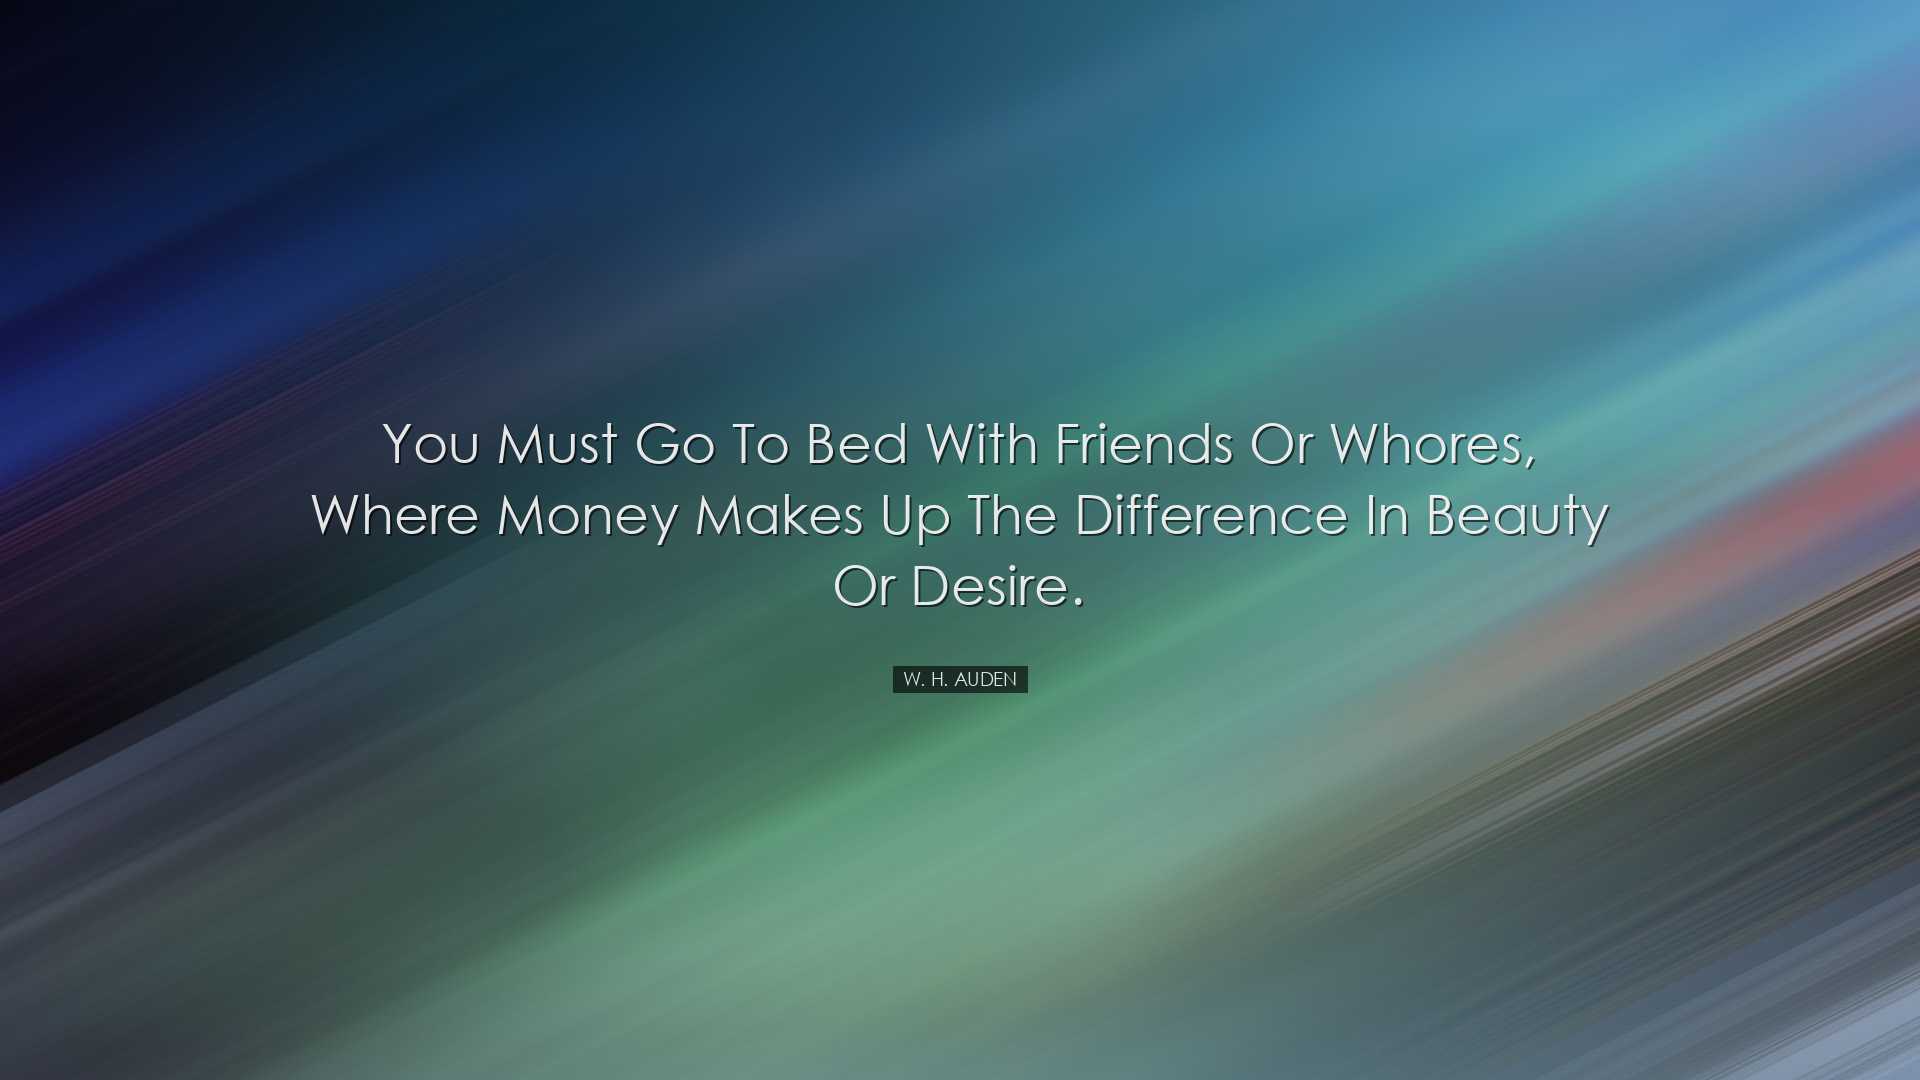 You must go to bed with friends or whores, where money makes up th